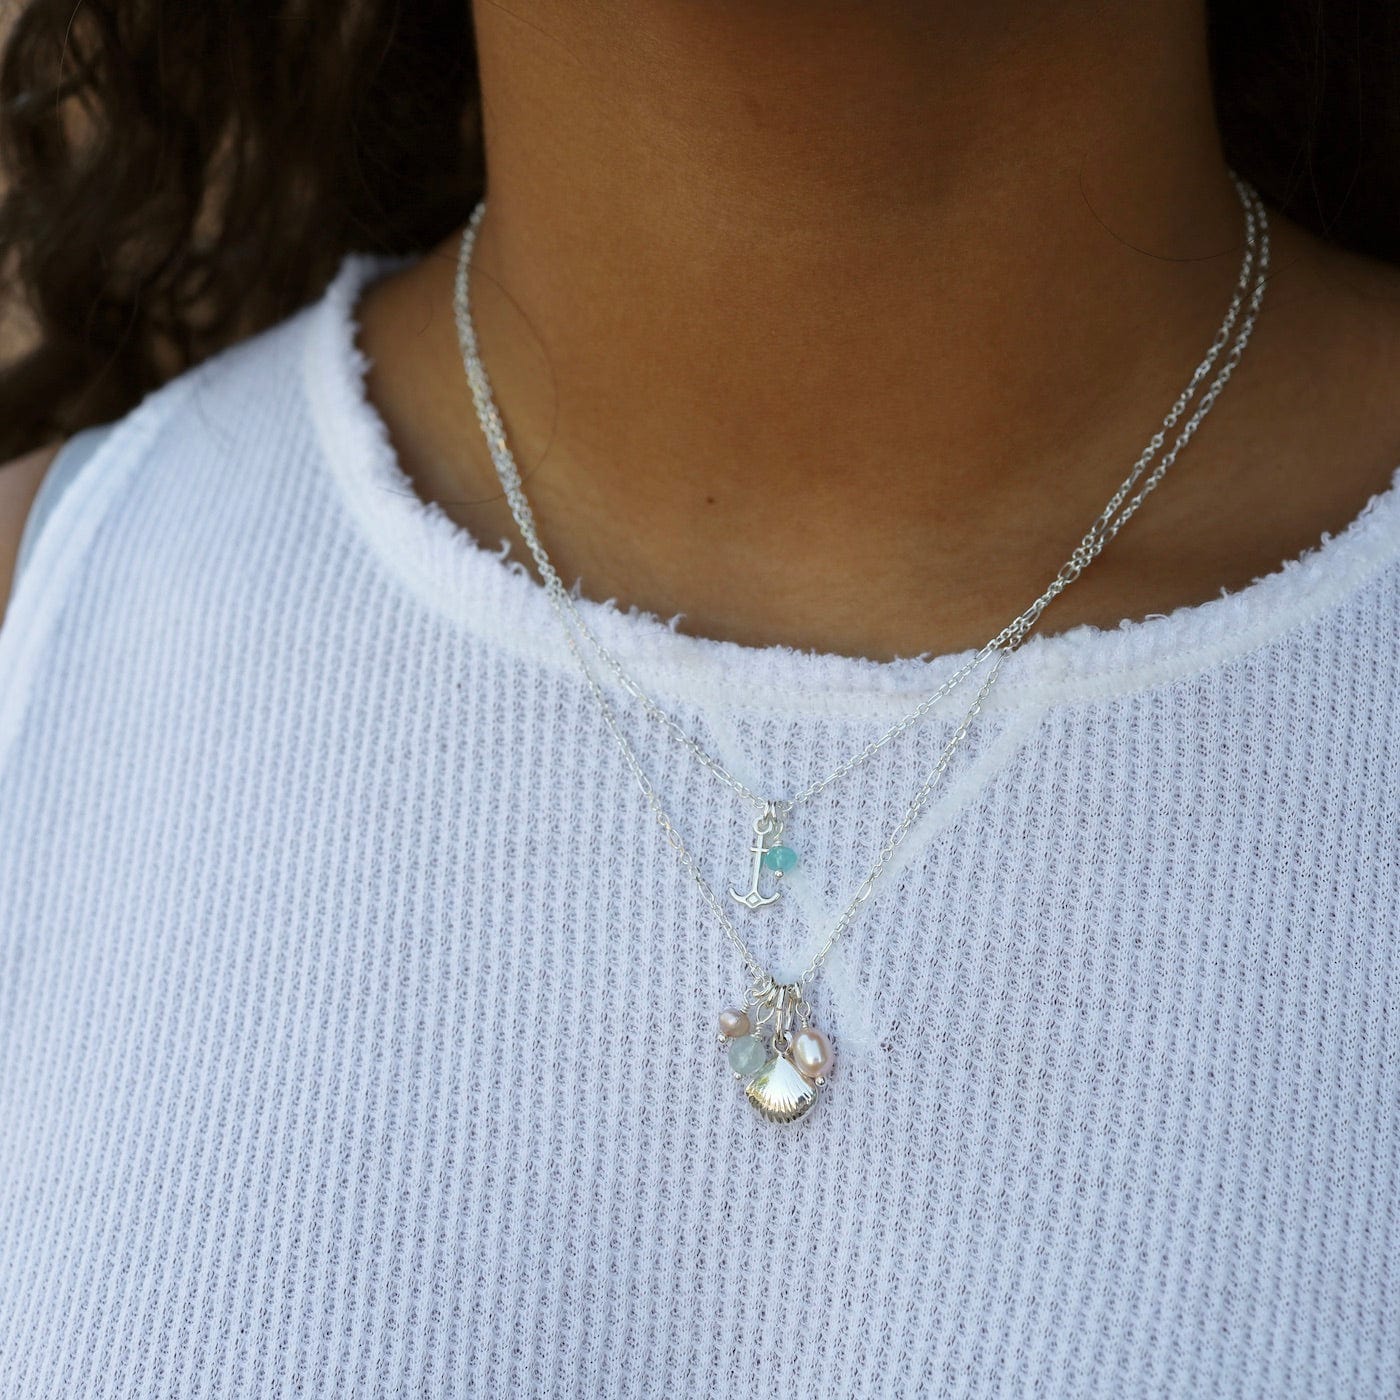 NKL Simple Treasures Charm Necklace with Shell, Pearls, & Aqua